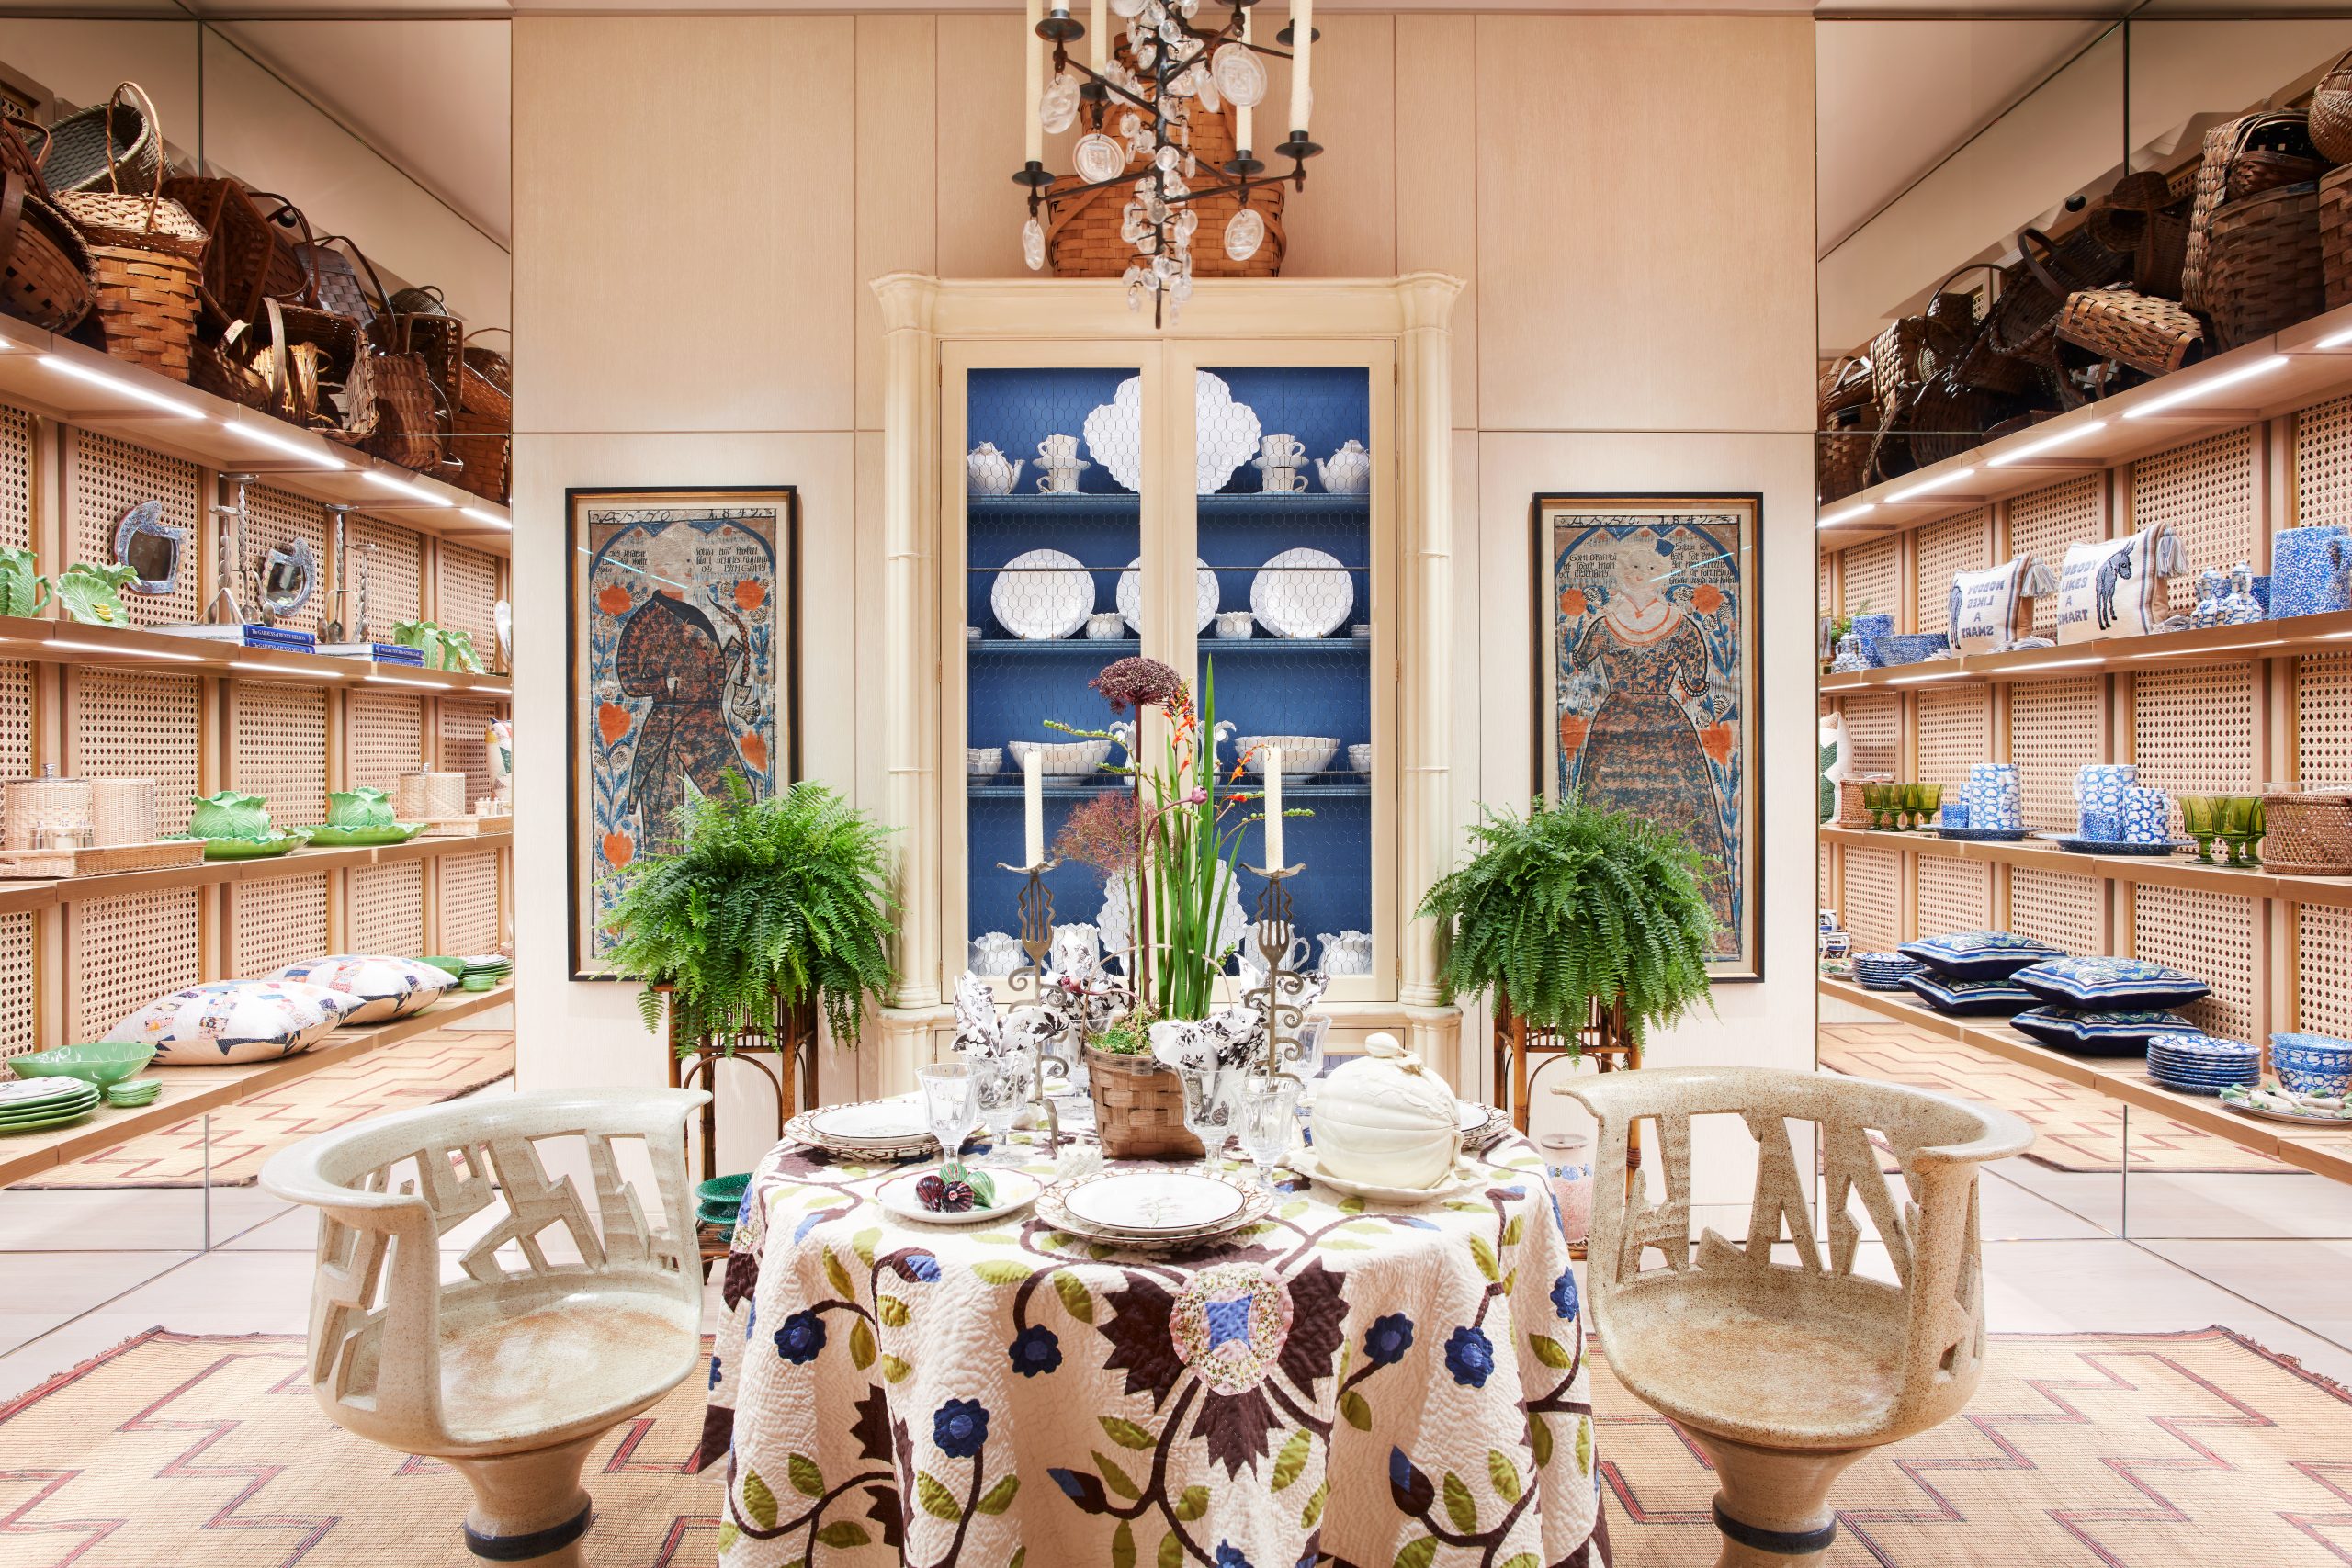 Tory Burch opens New York flagship store and plans first runway